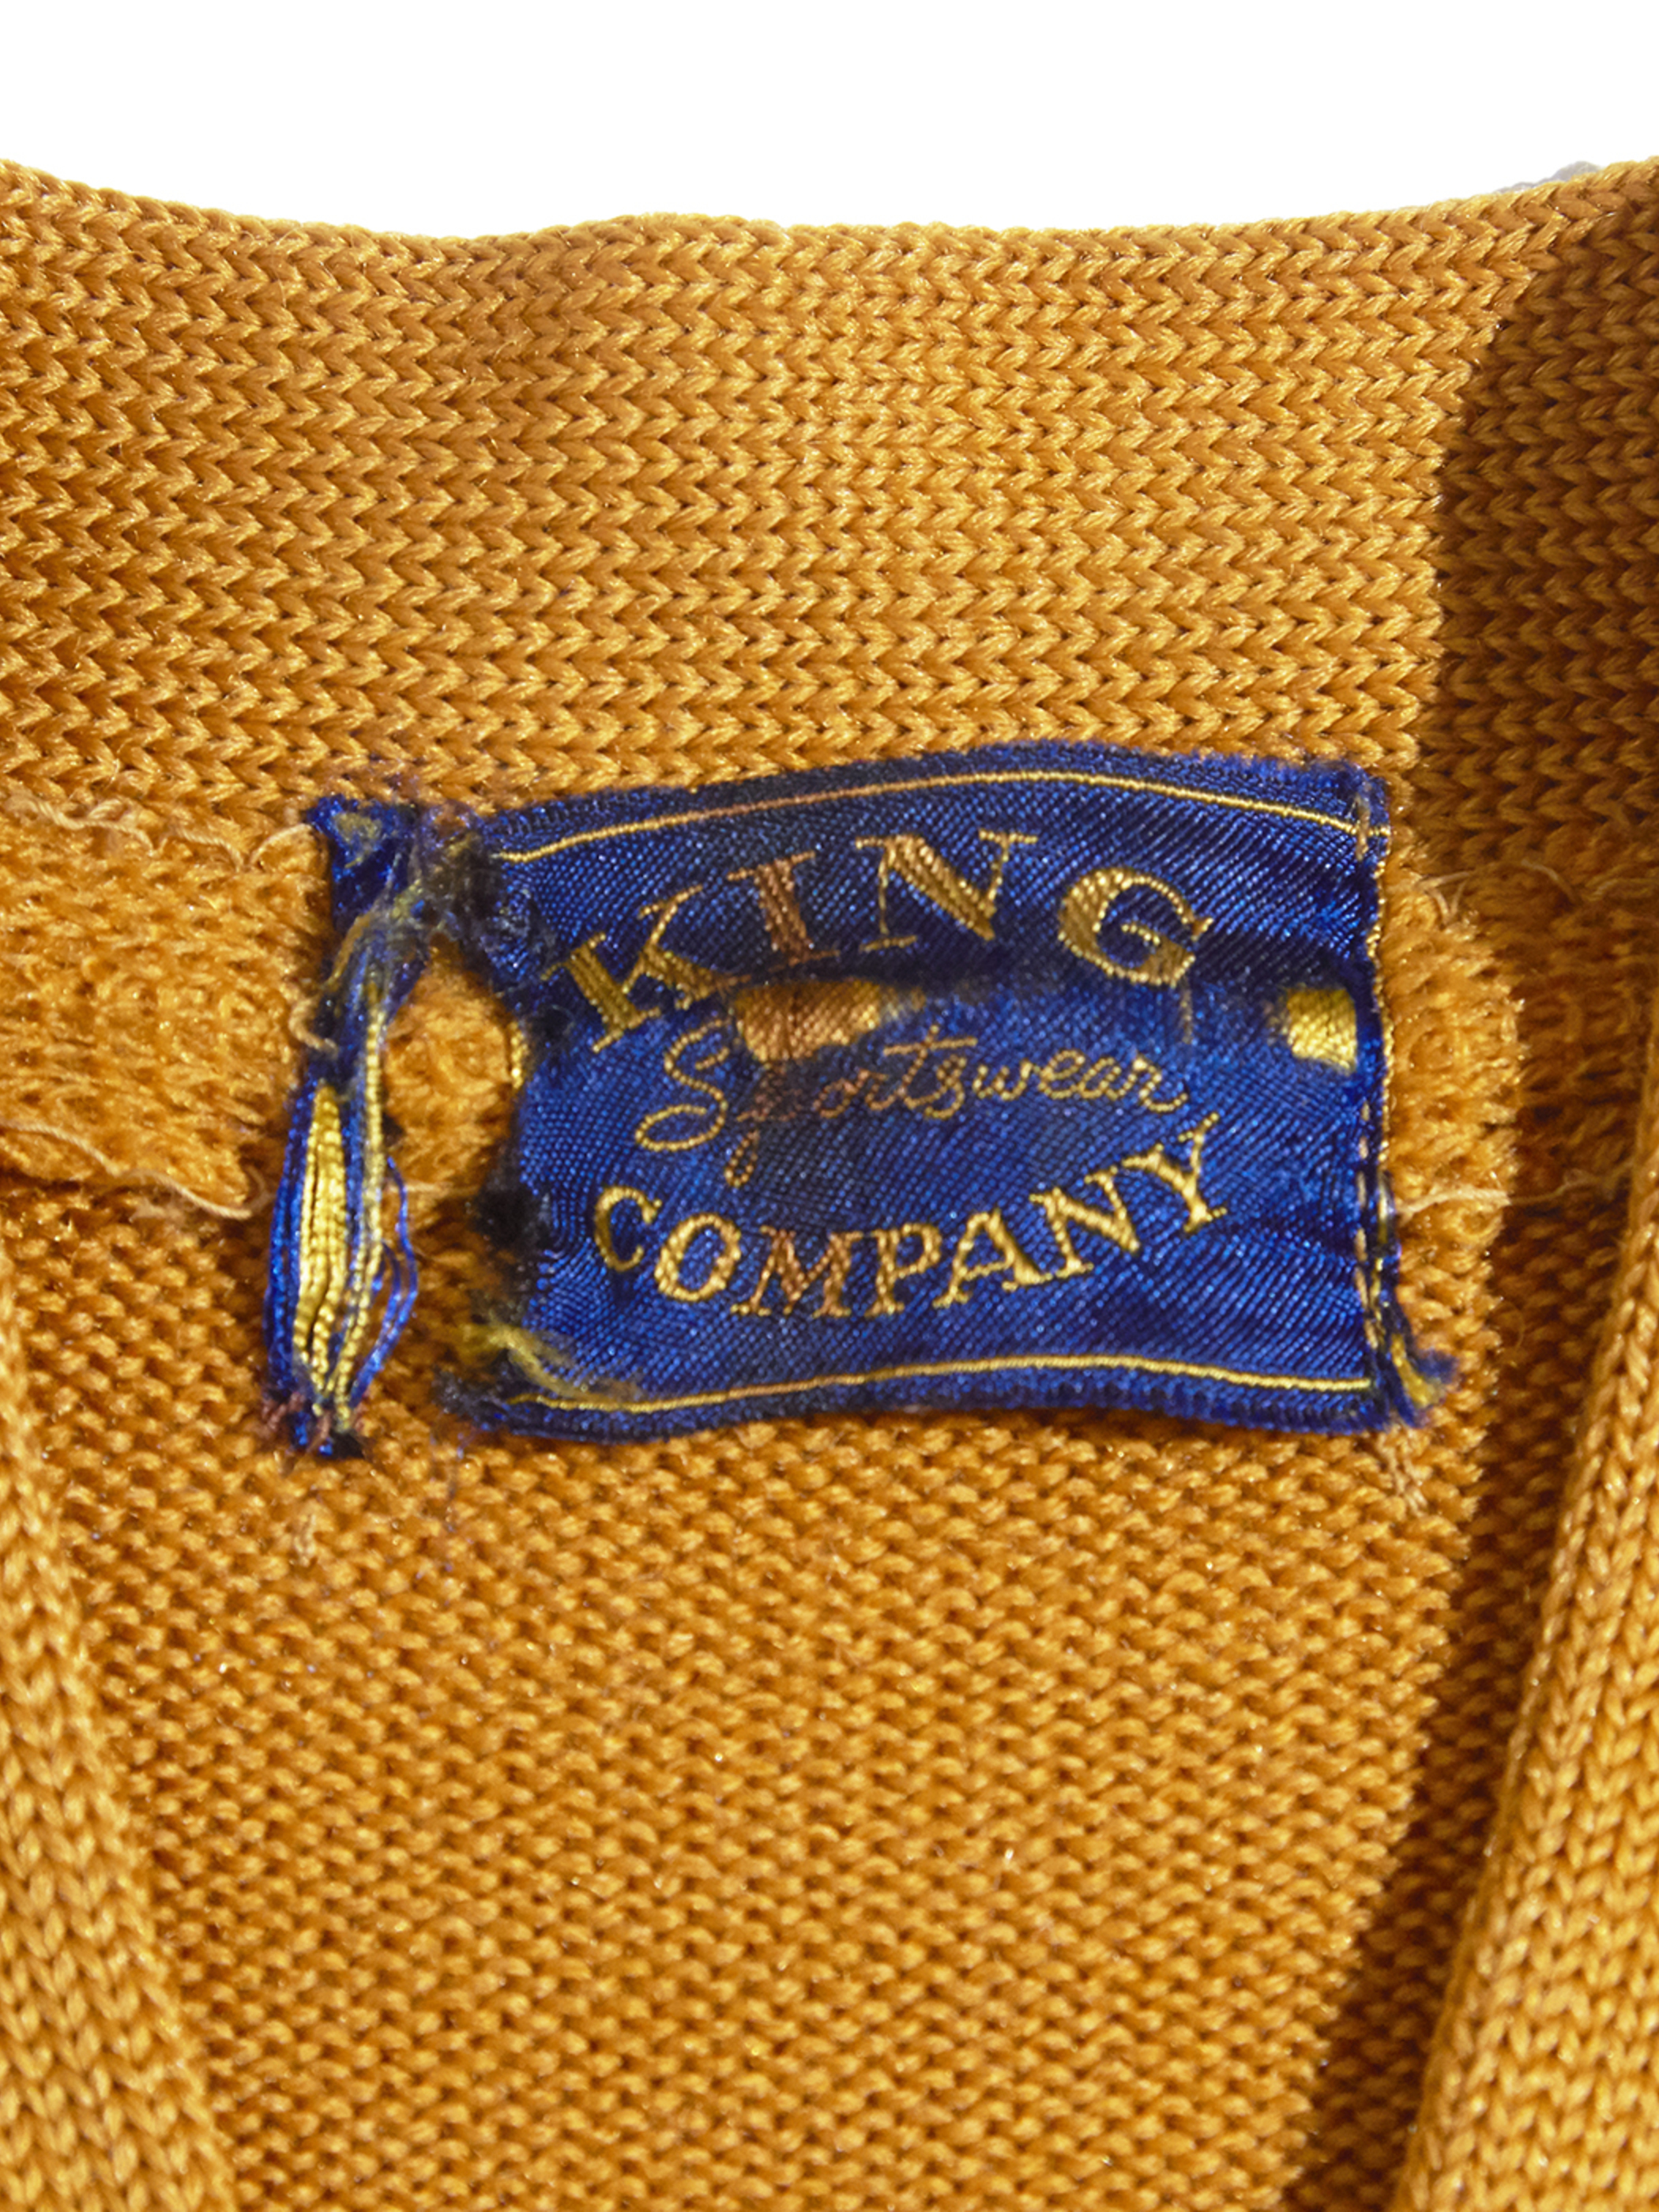 1970s "KING COMPANY" lettered cardigan -MUSTARD-